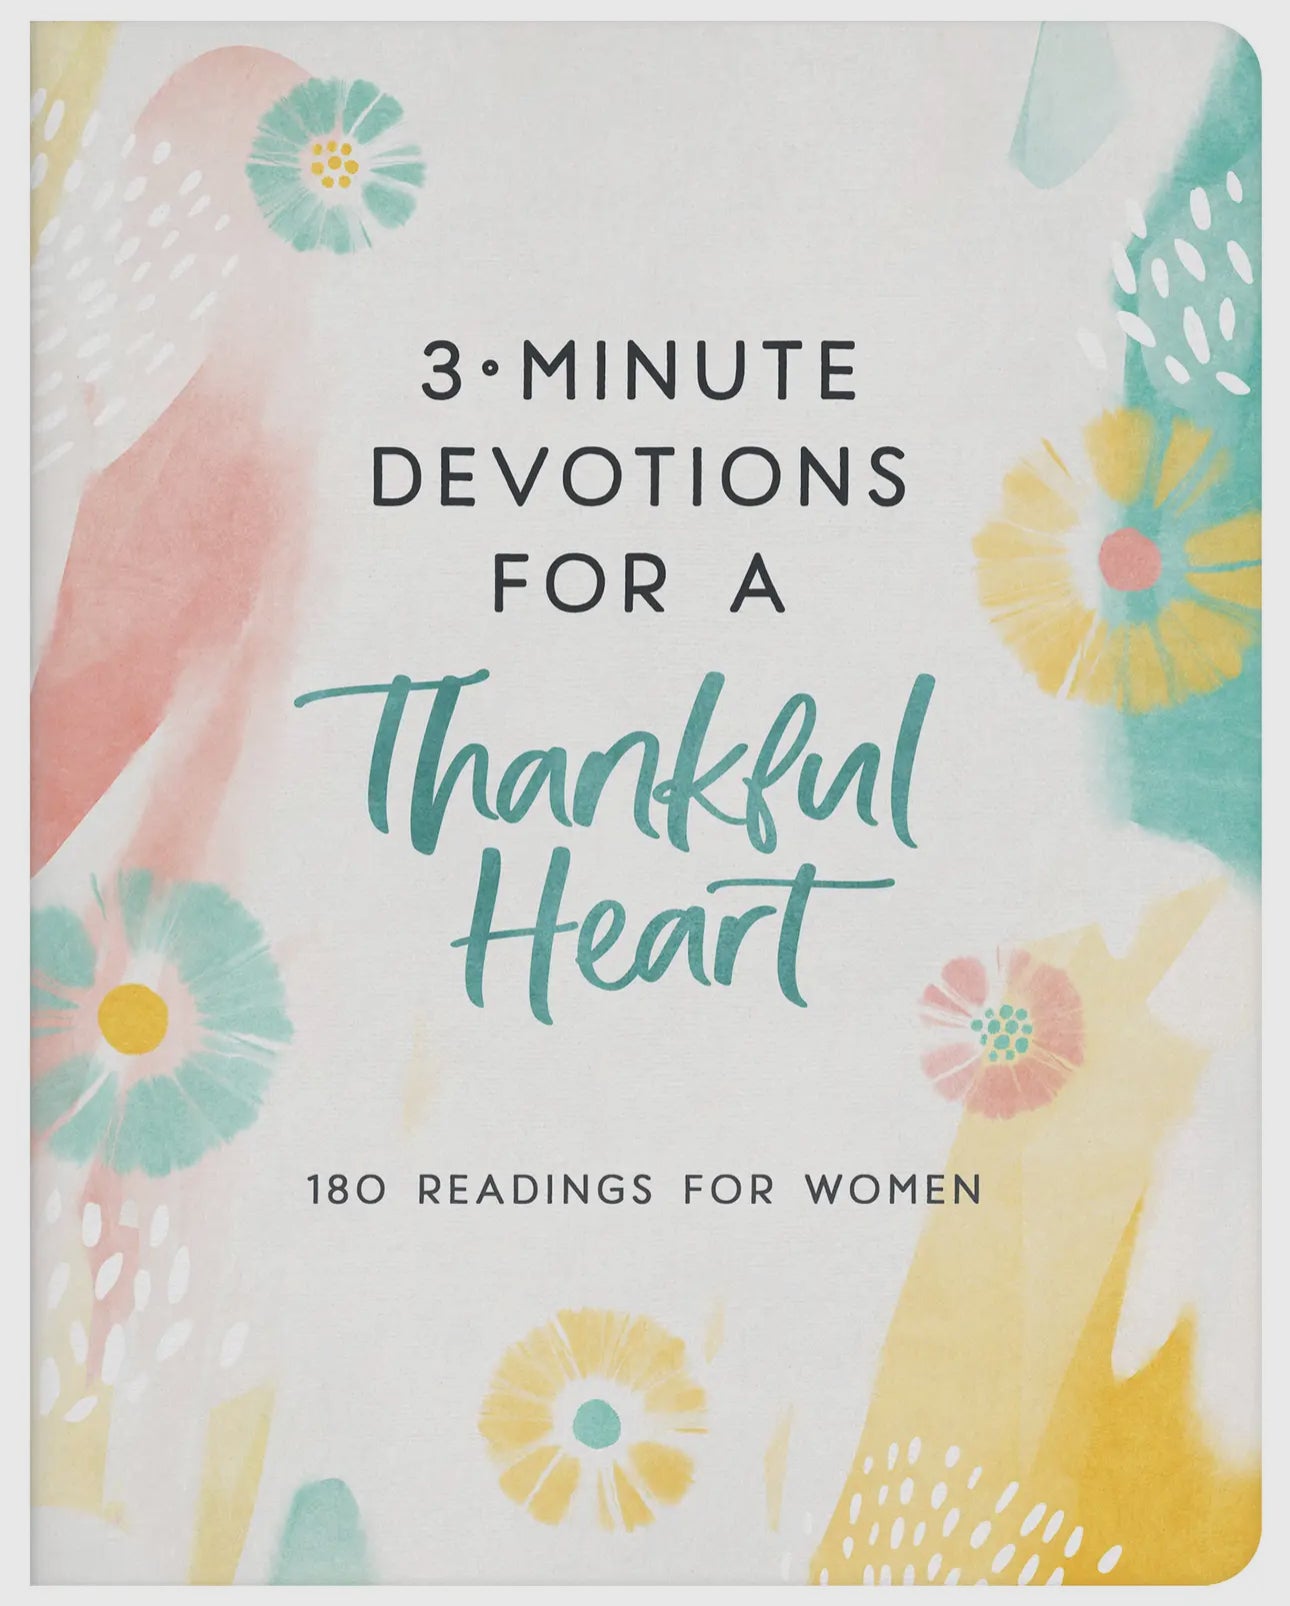 3-Minute Devotions for a Thankful Heart